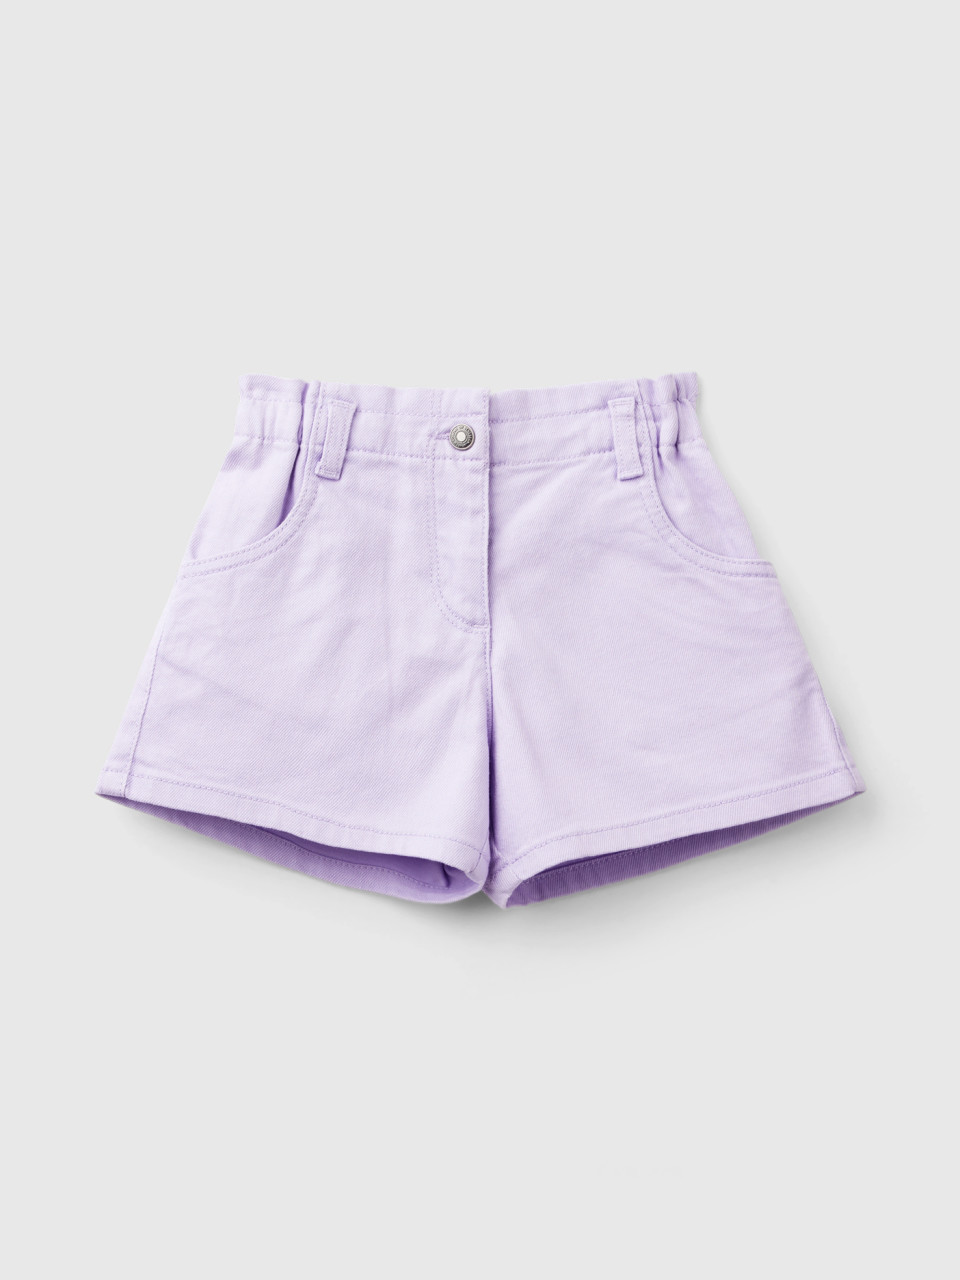 Benetton, Paperbag Shorts In Stretch Cotton, Lilac, Kids